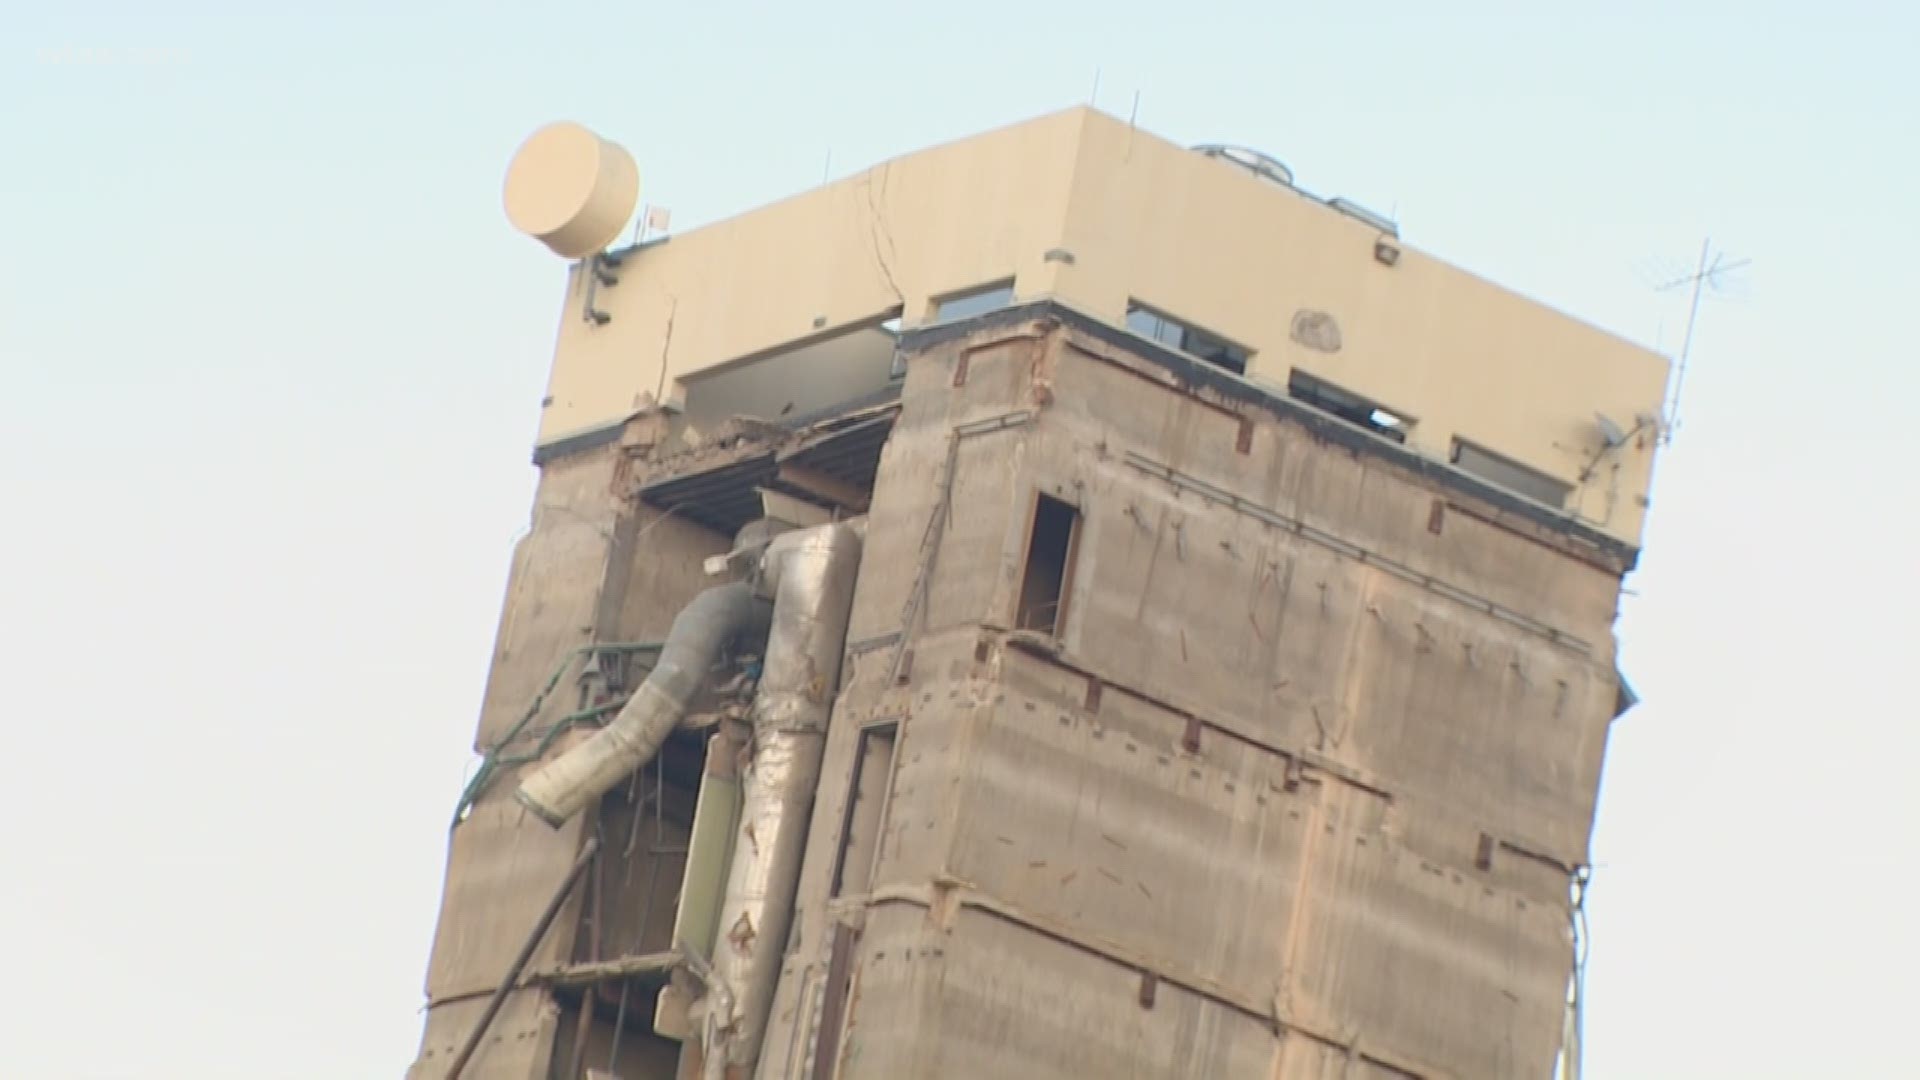 The implosion began at 7:45 a.m. but the tower still hadn't come down as of Sunday evening.